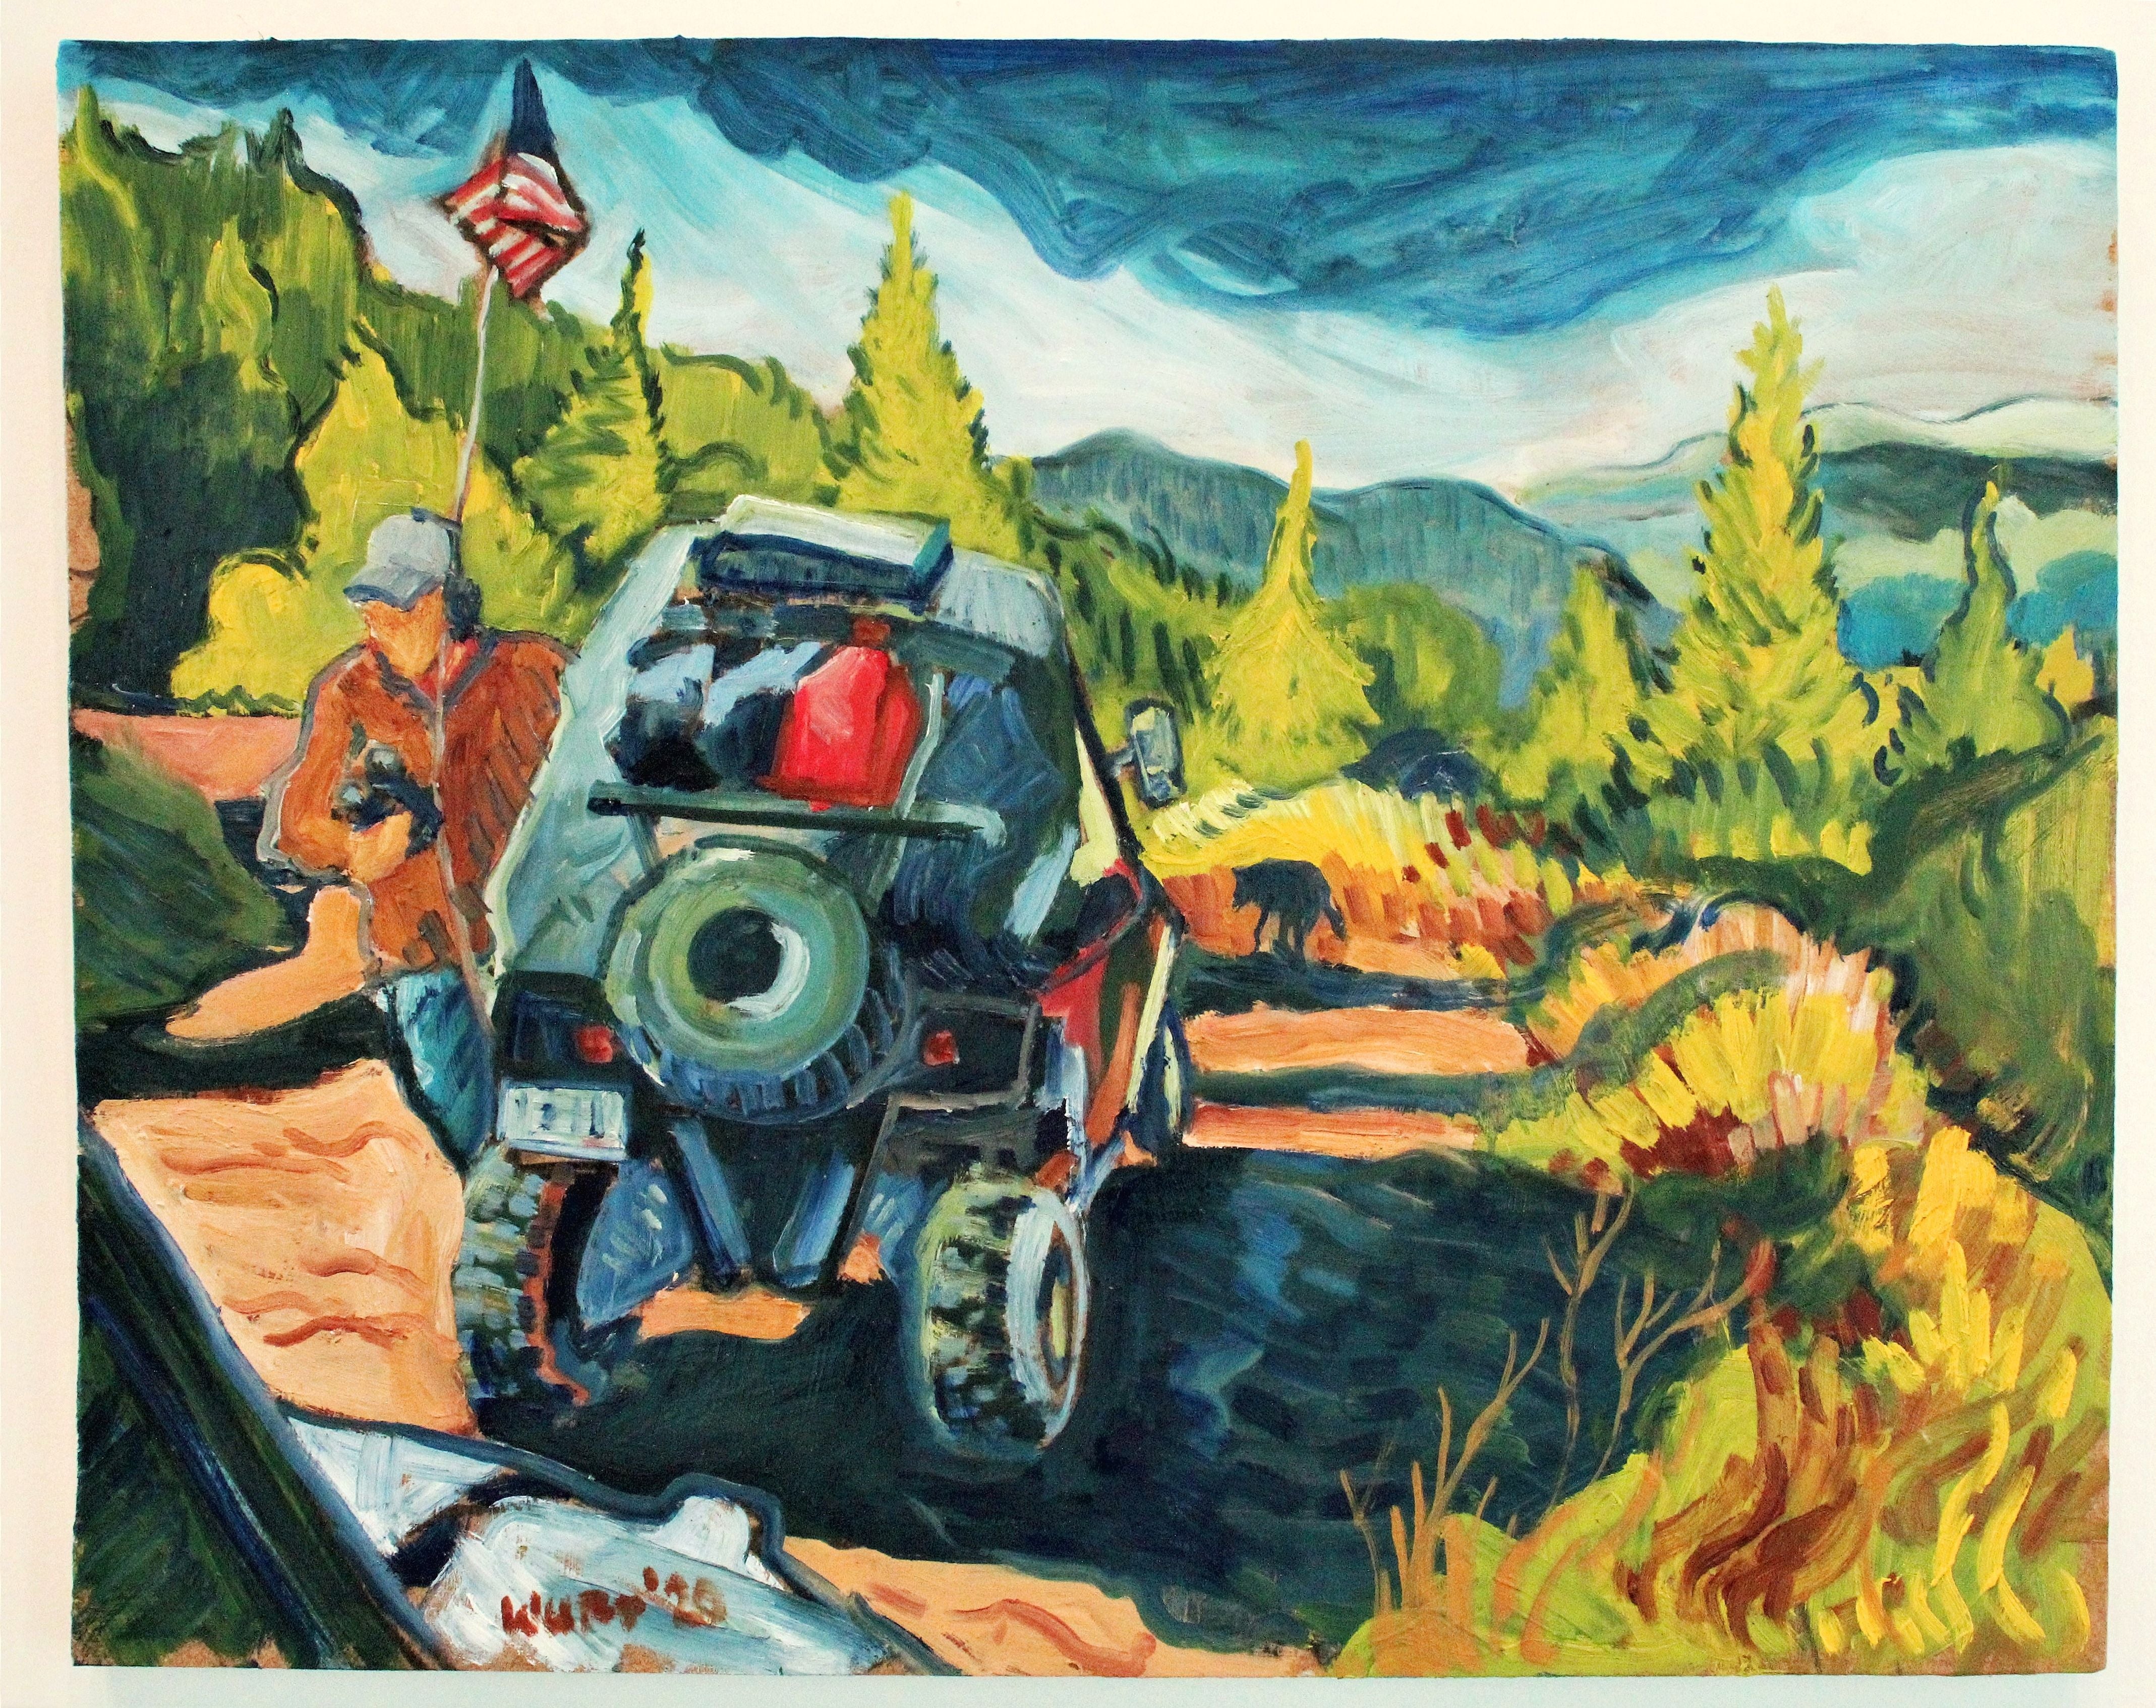 Impressionist-style painting of an adventurer with binoculars, a four-wheeler in a forest.